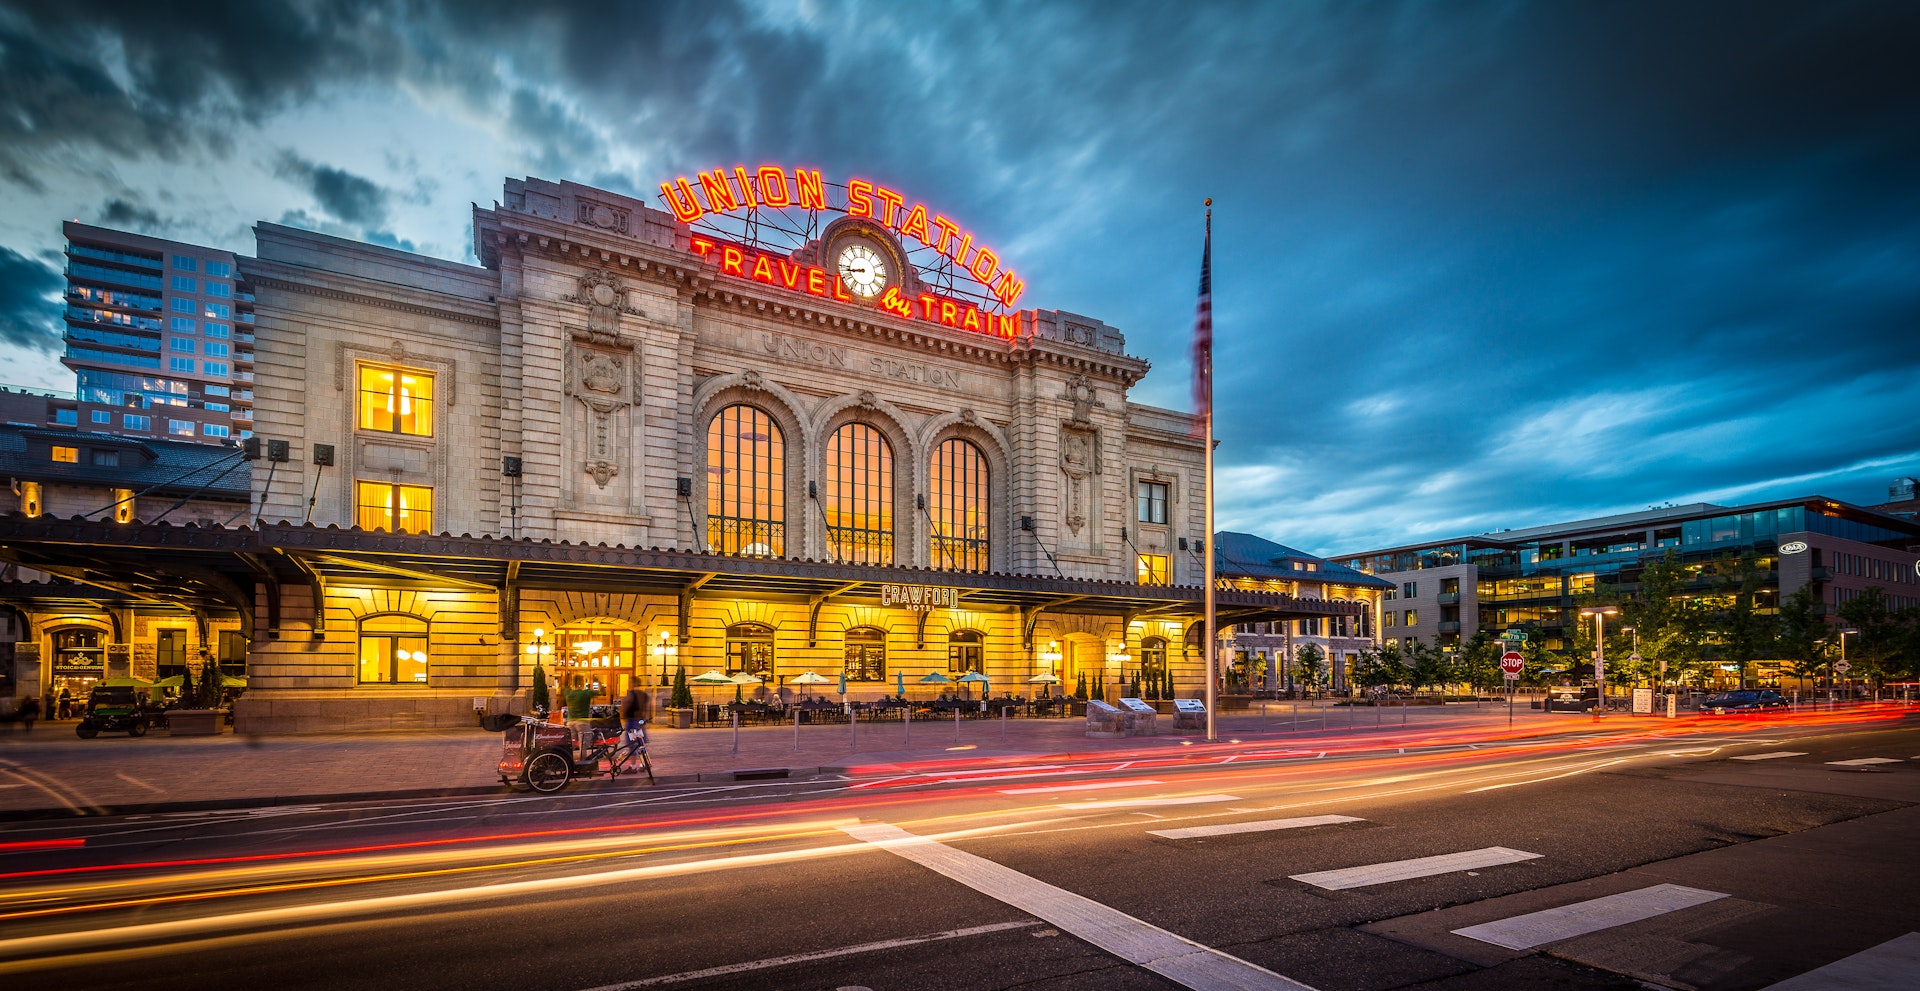 A long exposure shot of the Union Station at dusk